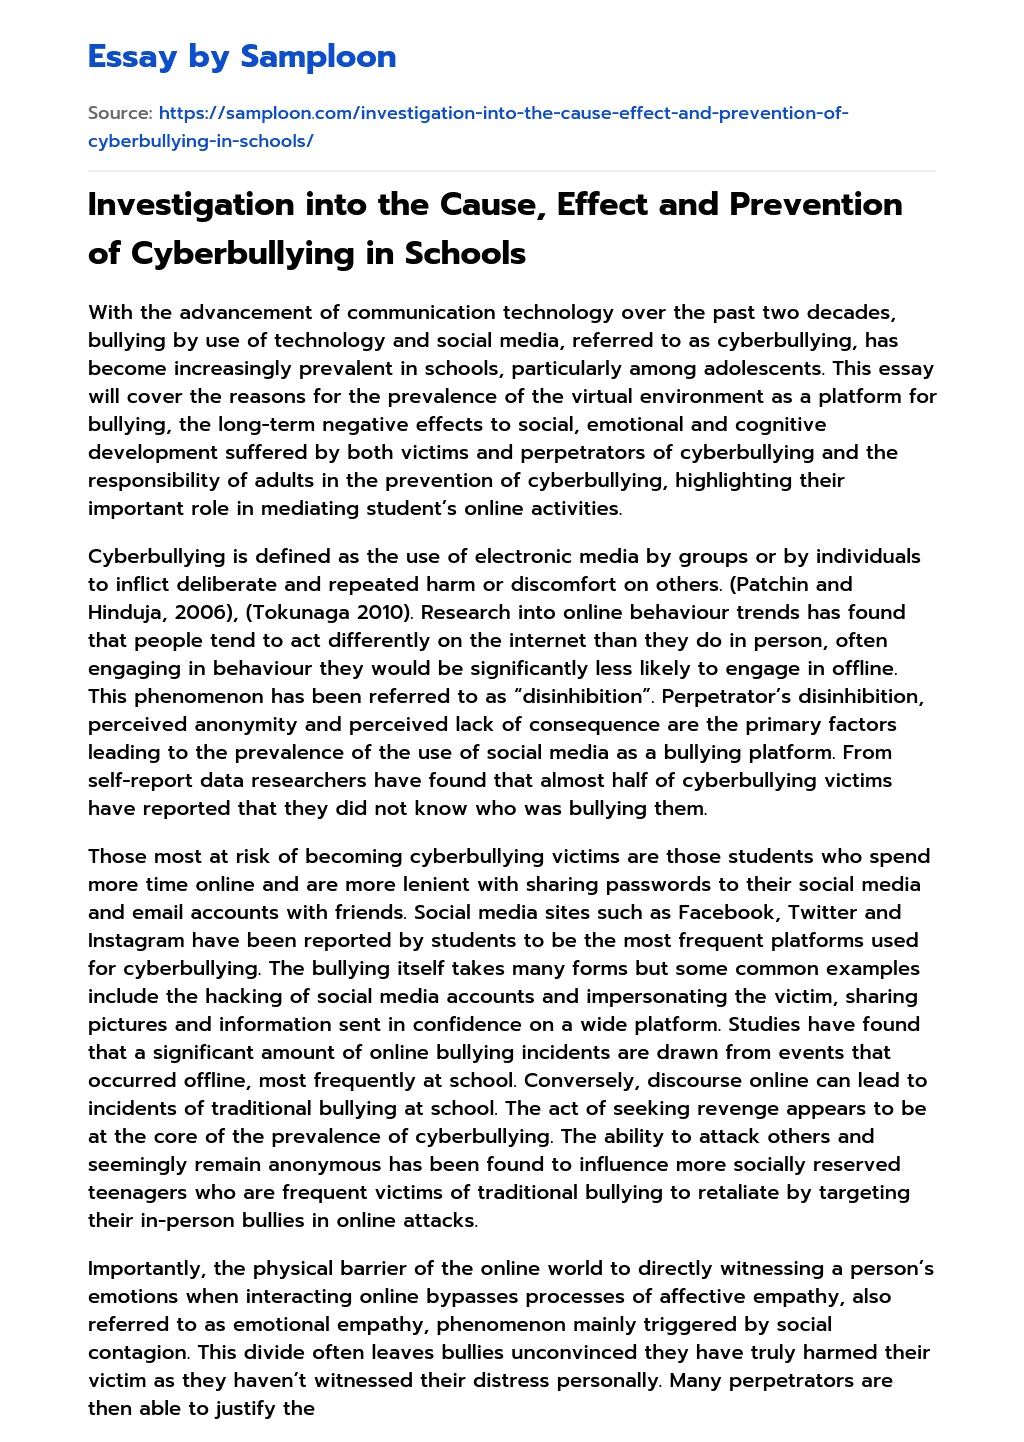 Investigation into the Cause, Effect and Prevention of Cyberbullying in Schools  essay